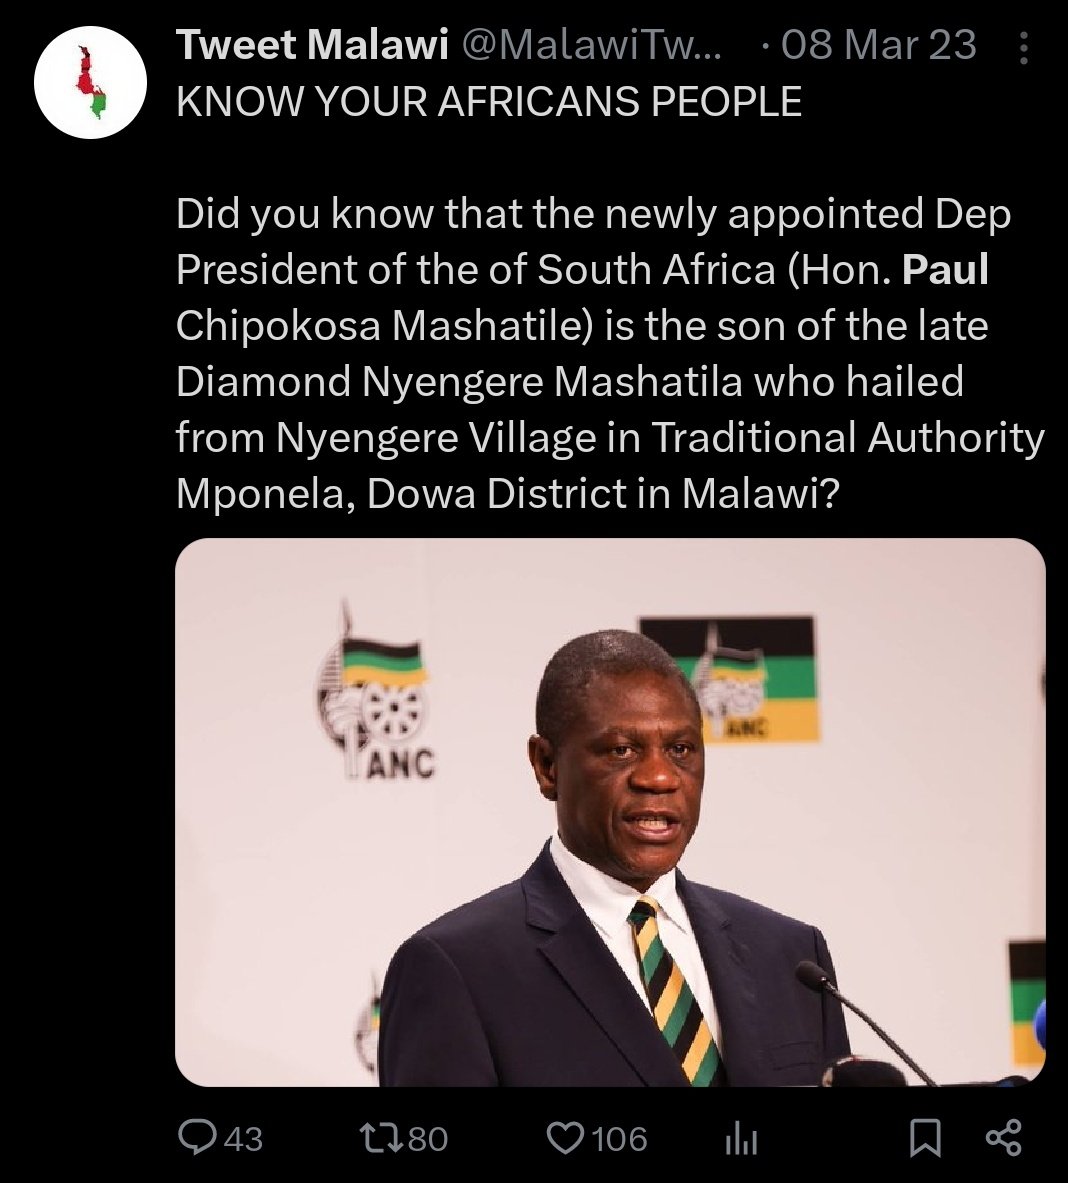 Since they heard that the deputy president of ANC Paul Chipokosa Mashatile is in charge, now illegal Malawian are flooding South Africa illegally !